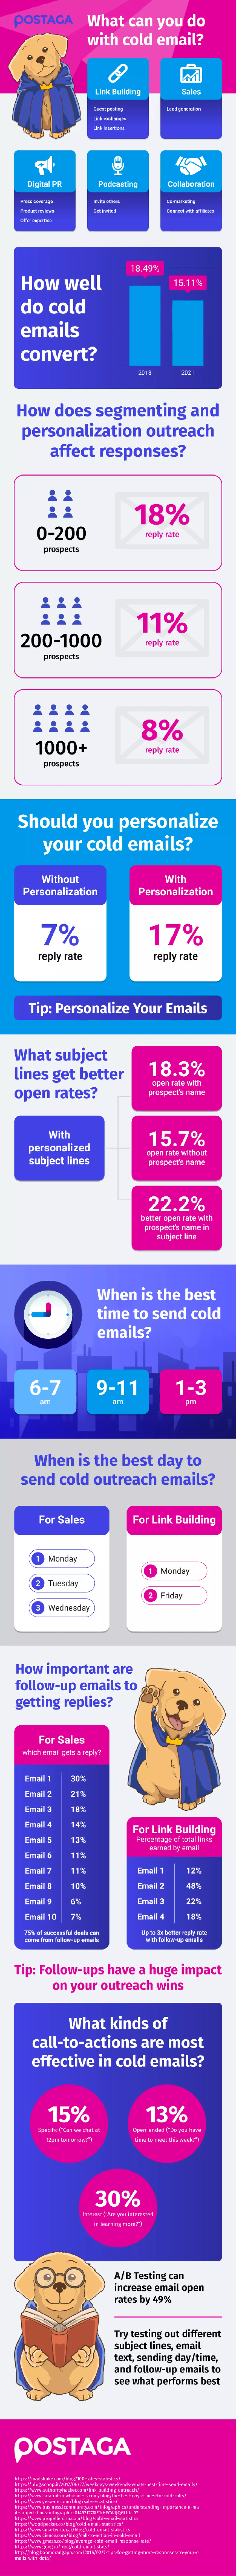 what you can do with cold email infographic